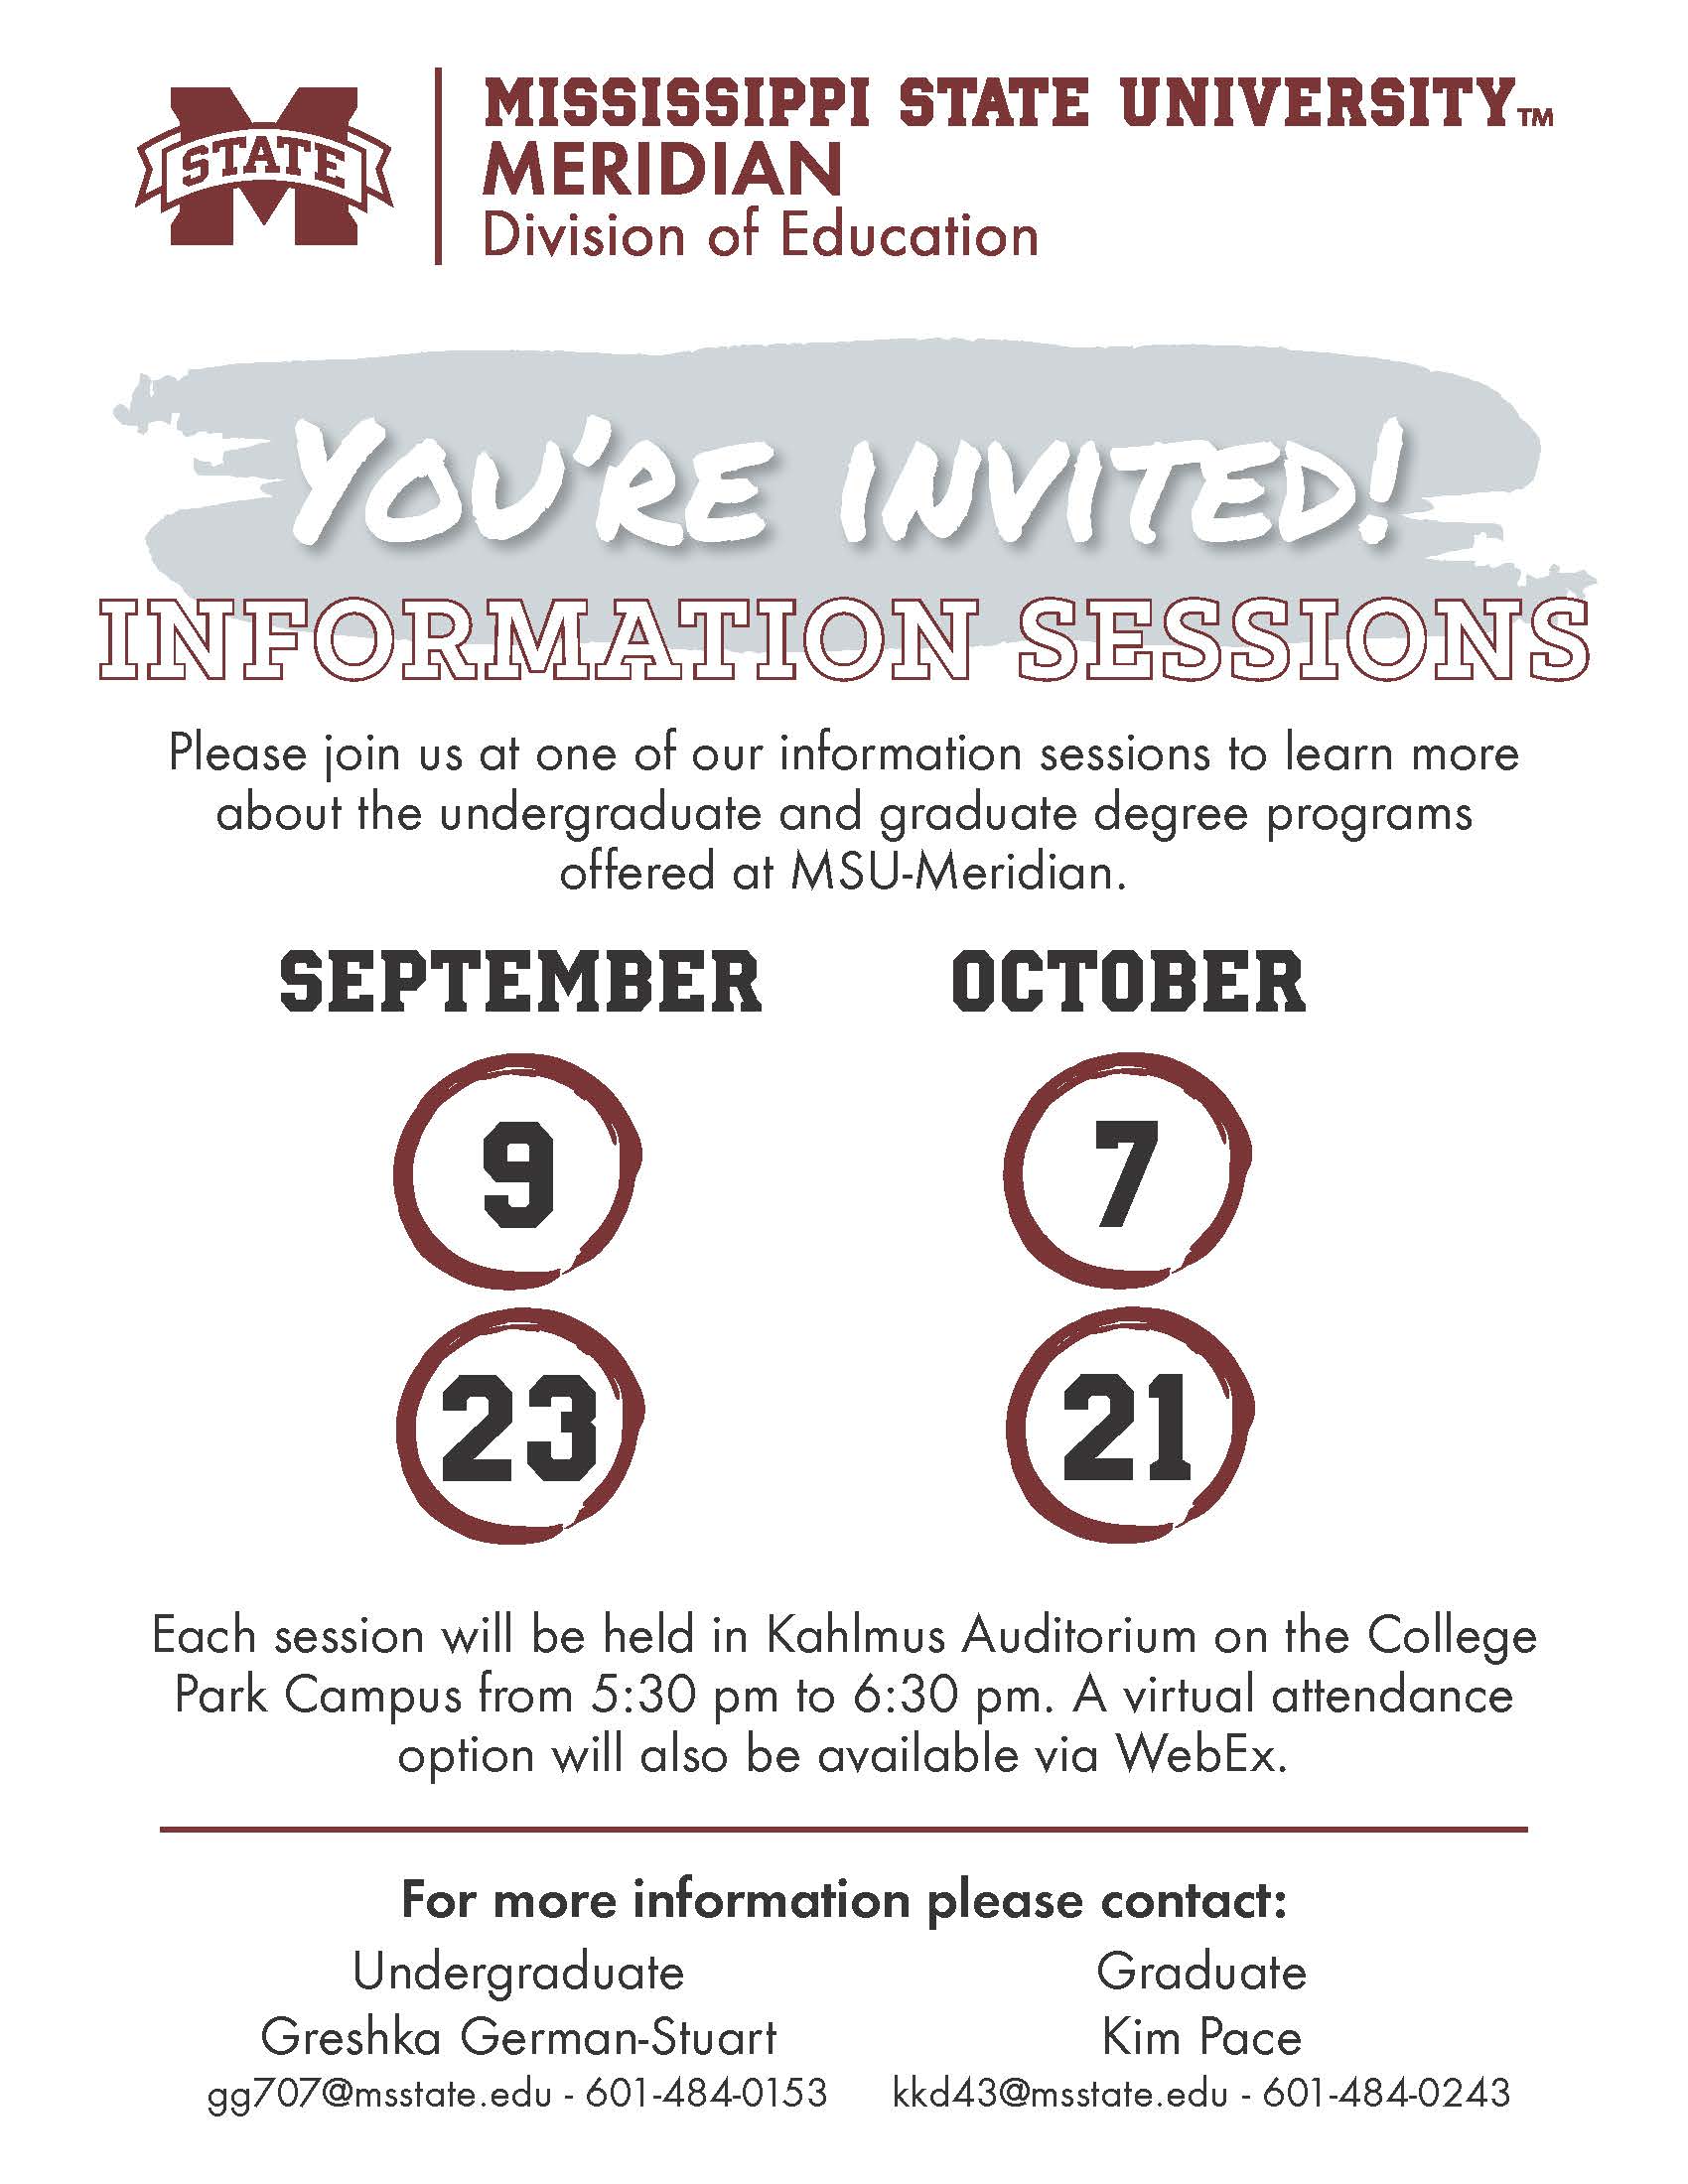 Information sessions will be held September 9 and 23 and October 7 and 21